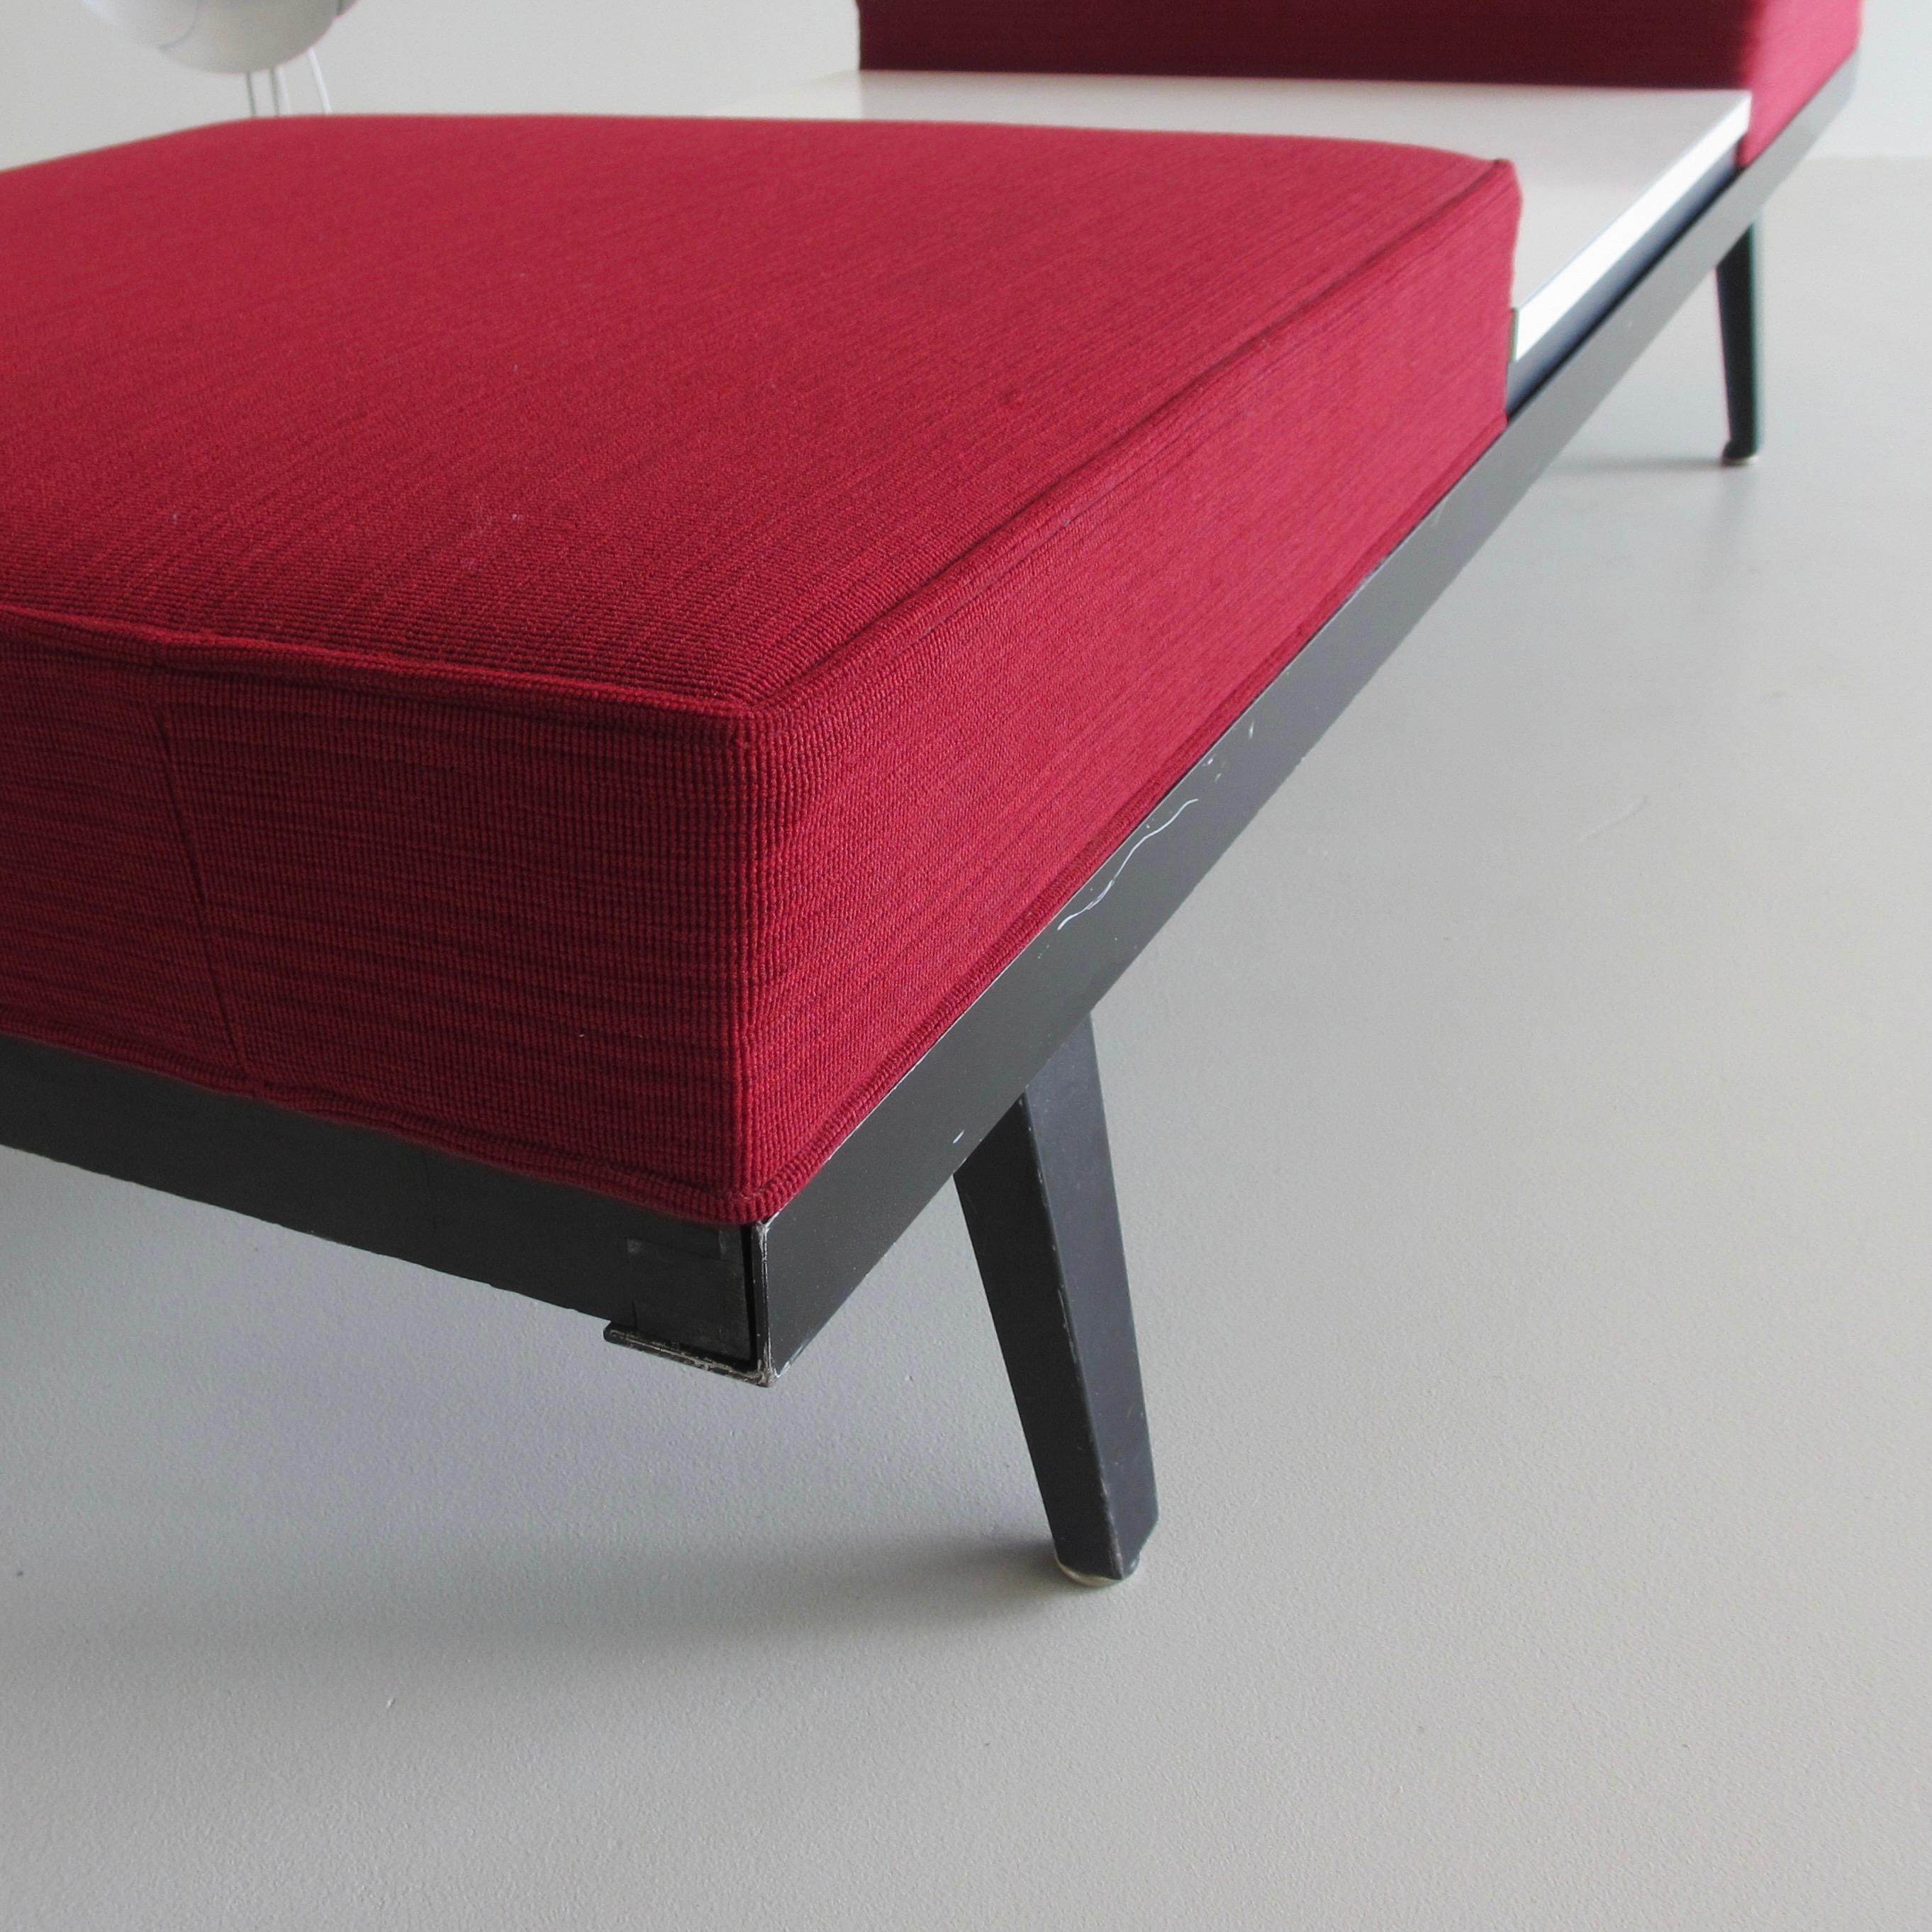 Steel frame bench and table designed by George Nelson. U.S.A., Herman Miller, 1955.

Black steel frame with three modular parts, consisting of two cushions upholstered in red wool material, plus a white Formica table mudule. These three modules